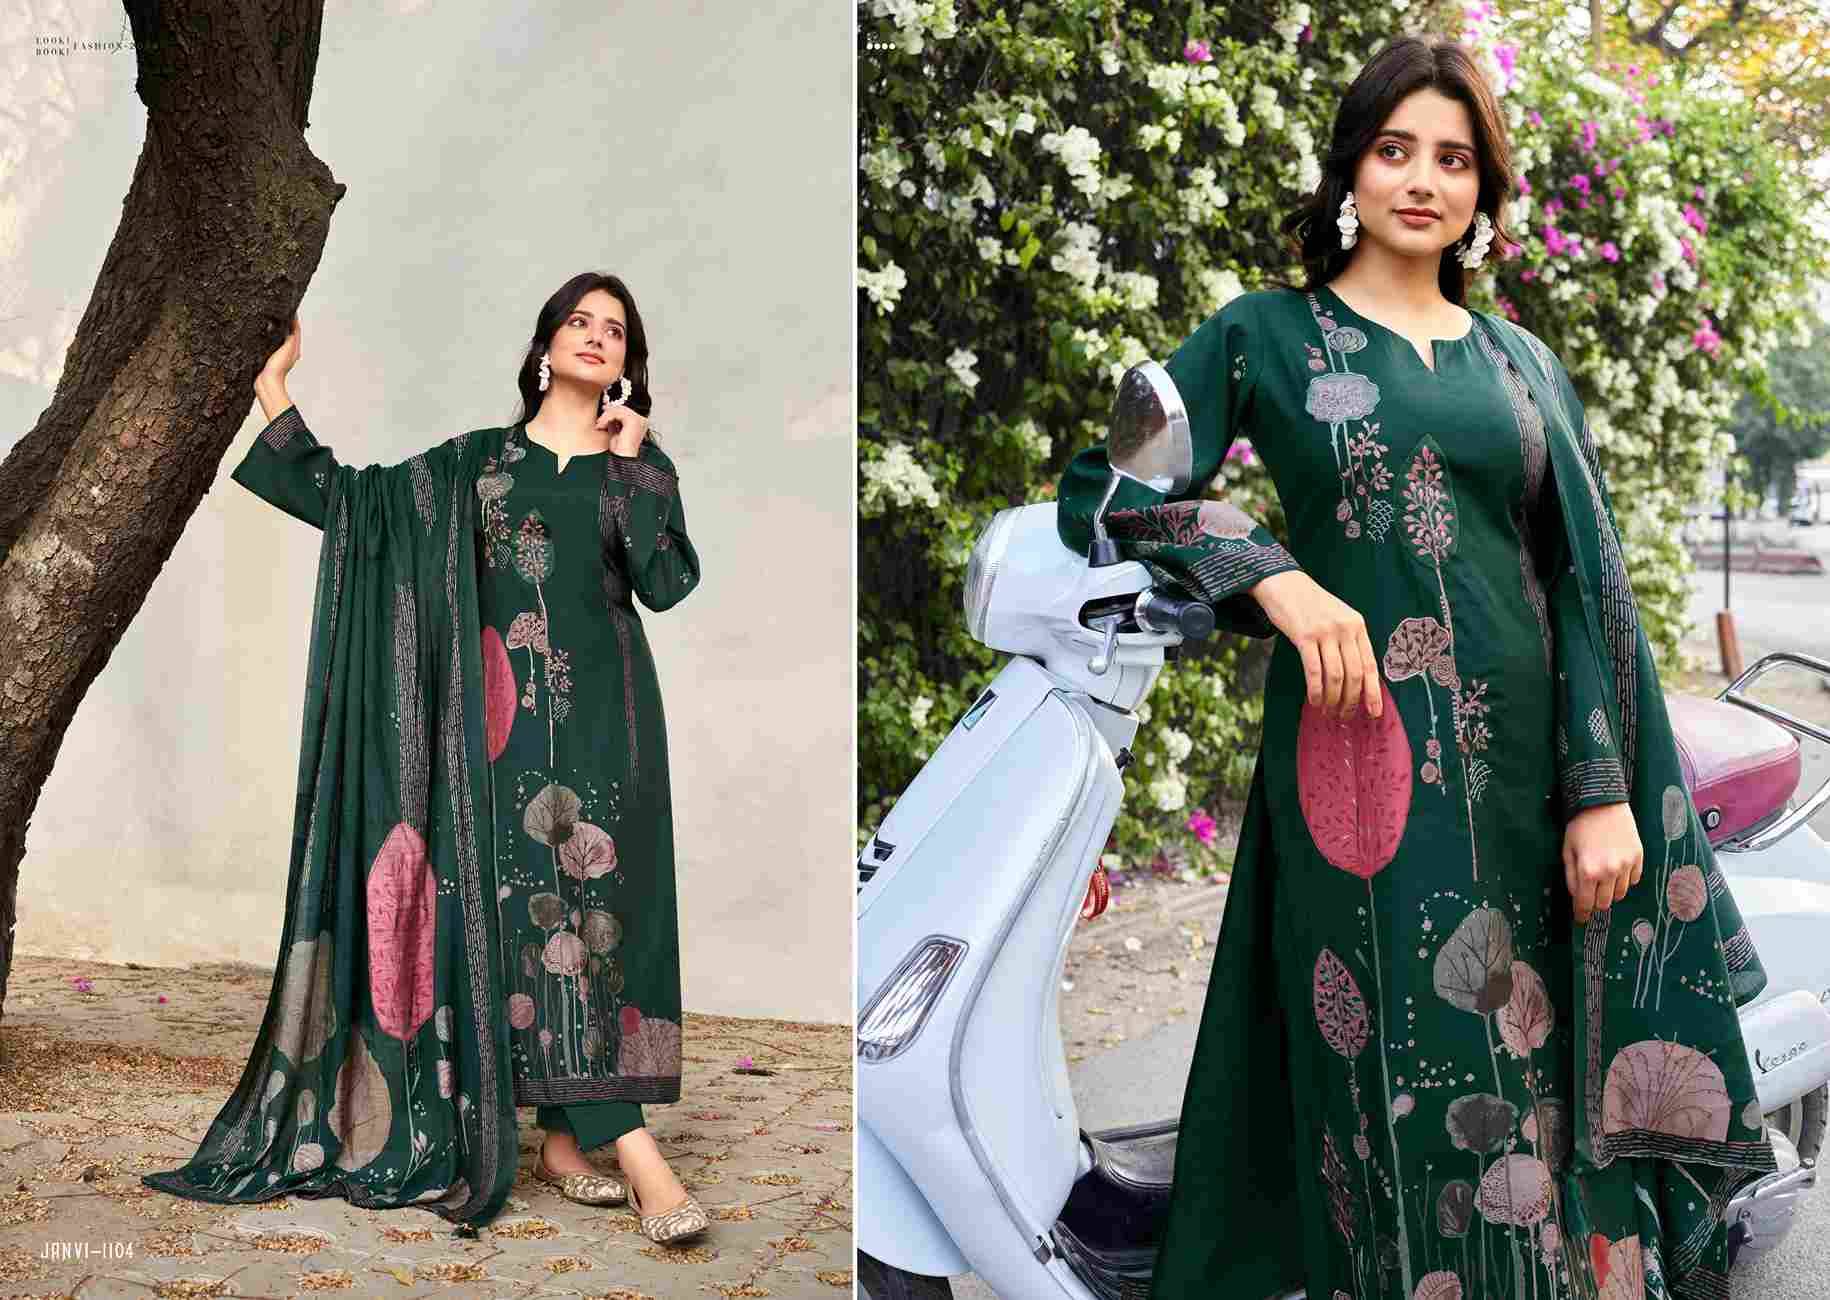 Janvi By Mumtaz Arts 1101 To 1104 Series Beautiful Festive Suits Stylish Fancy Colorful Party Wear & Occasional Wear Pure Viscose Muslin Print Dresses At Wholesale Price